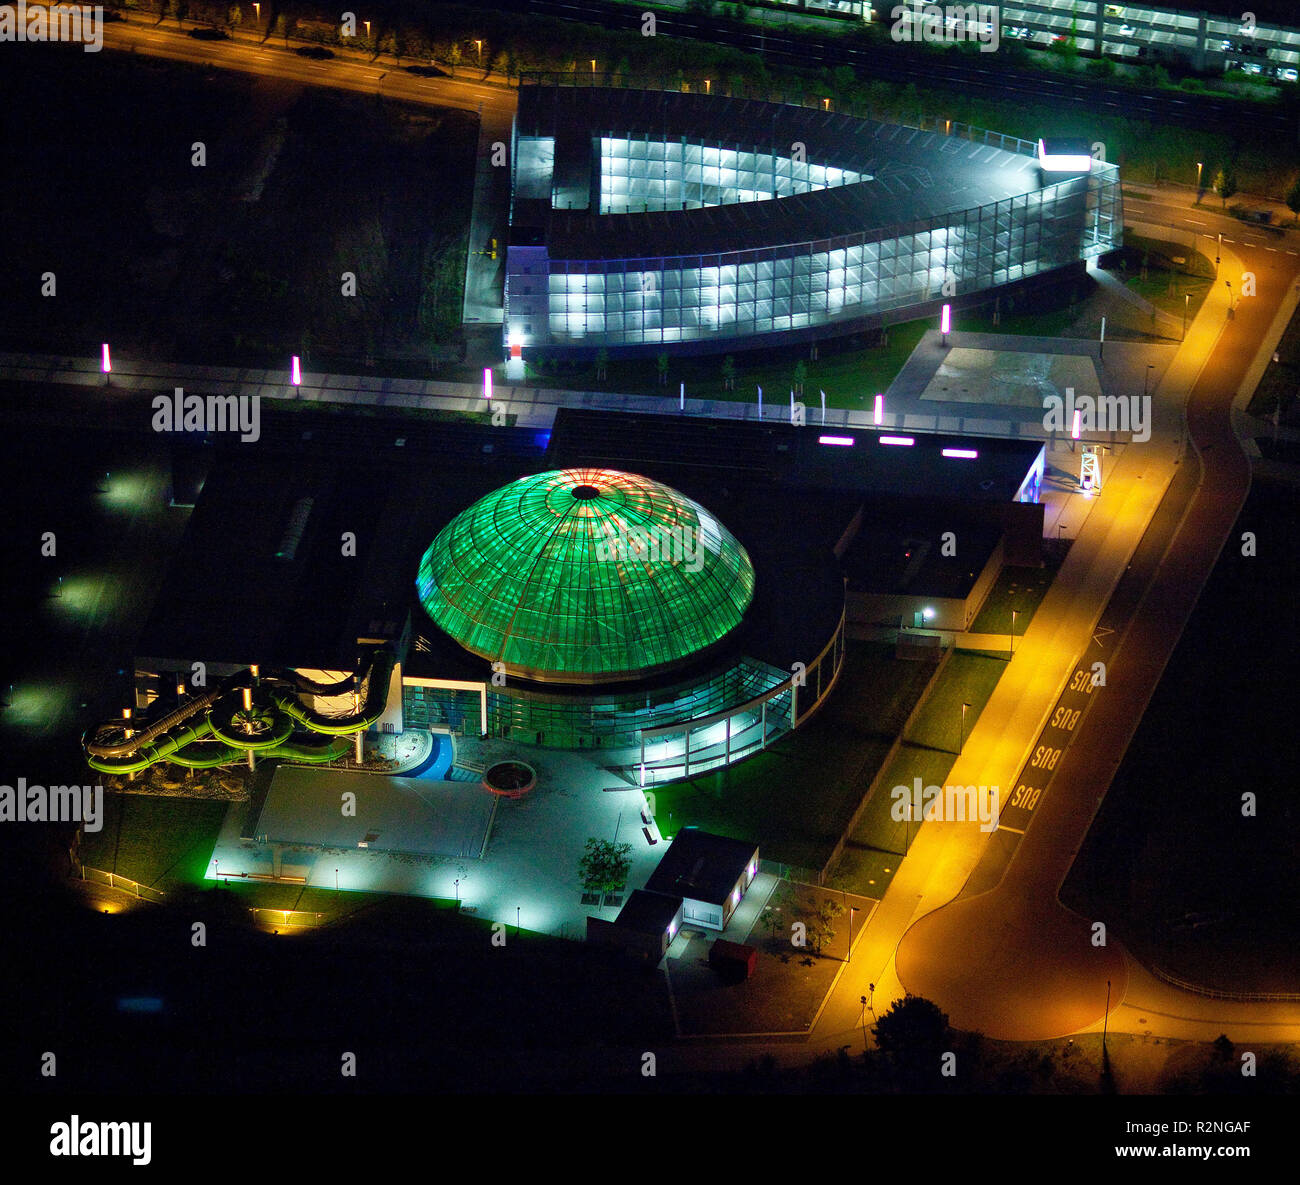 Aerial view, Night shot, Neue Mitte with gasometer, Centro, new water park, Theater at night, Oberhausen, Ruhr area, North Rhine-Westphalia, Germany, Europe, Stock Photo